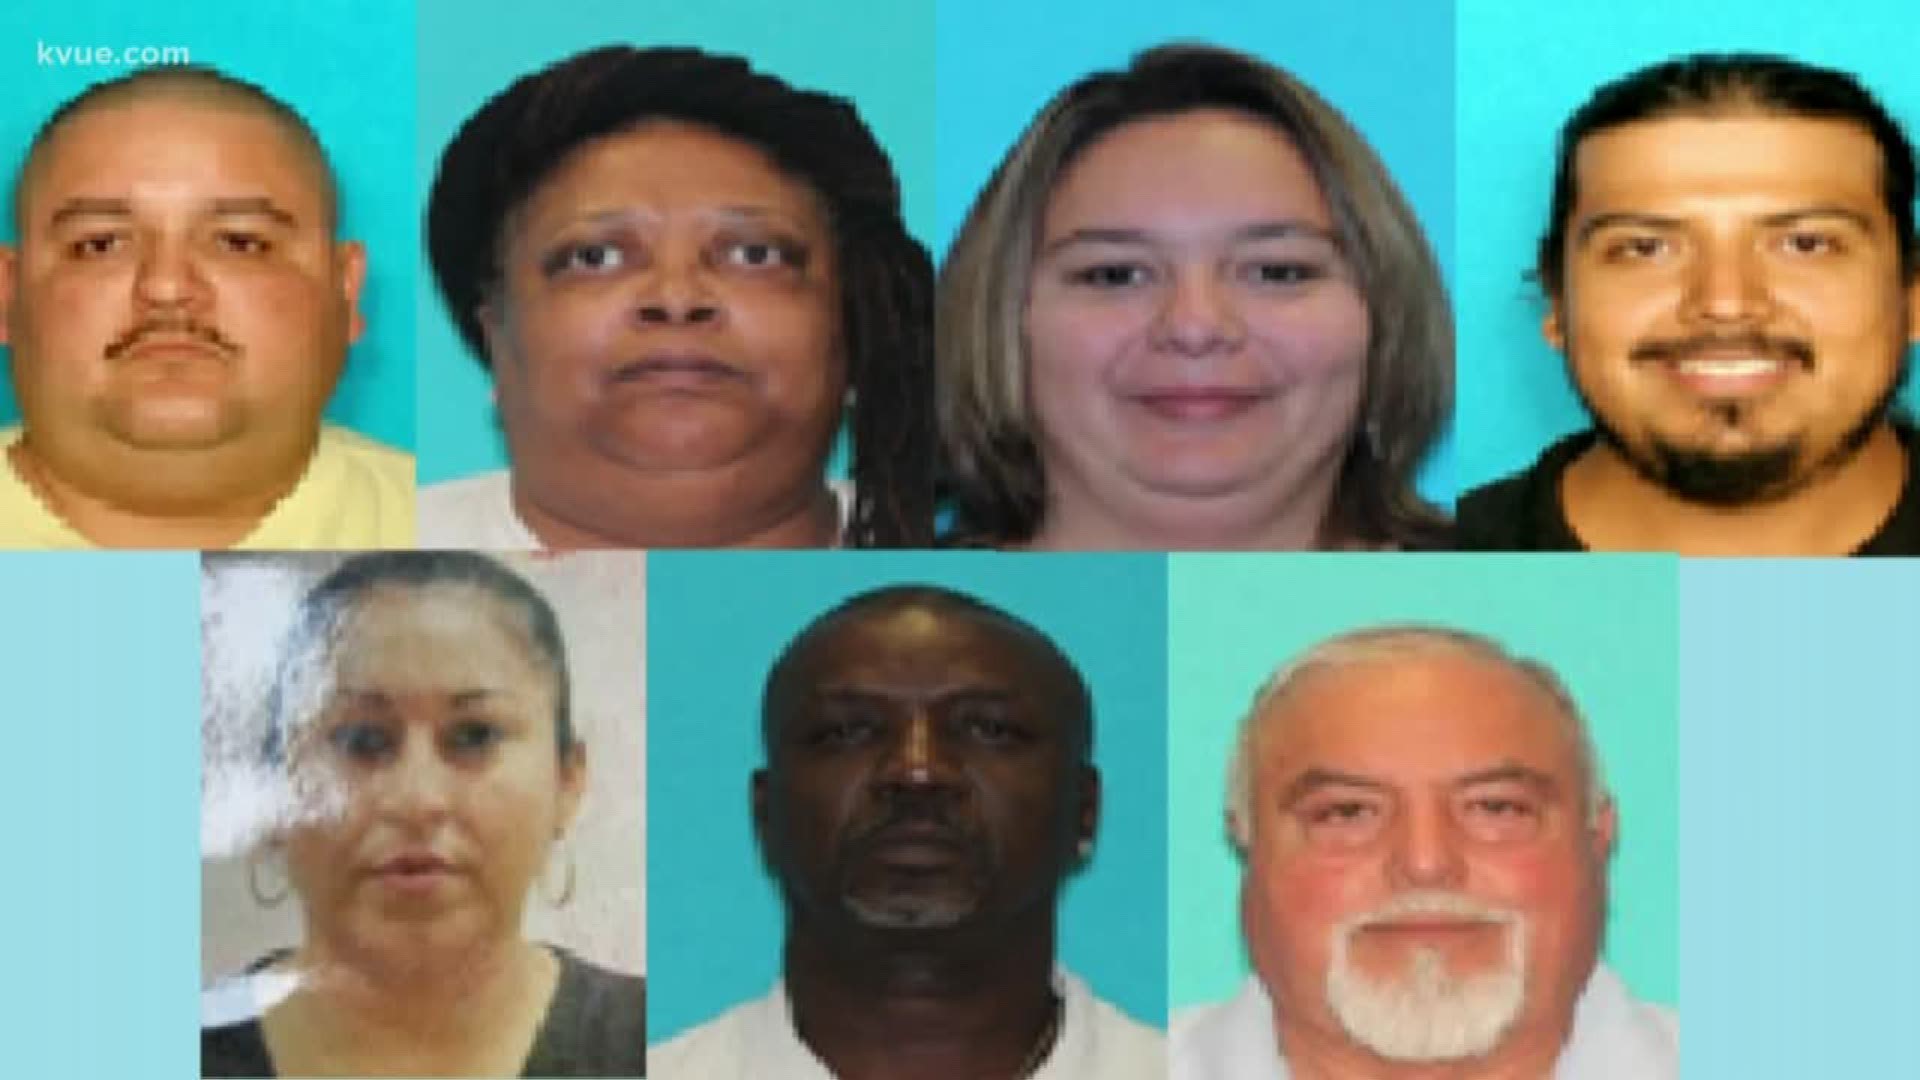 Travis County satellite tax offices to reopen after 7 charged in fraud